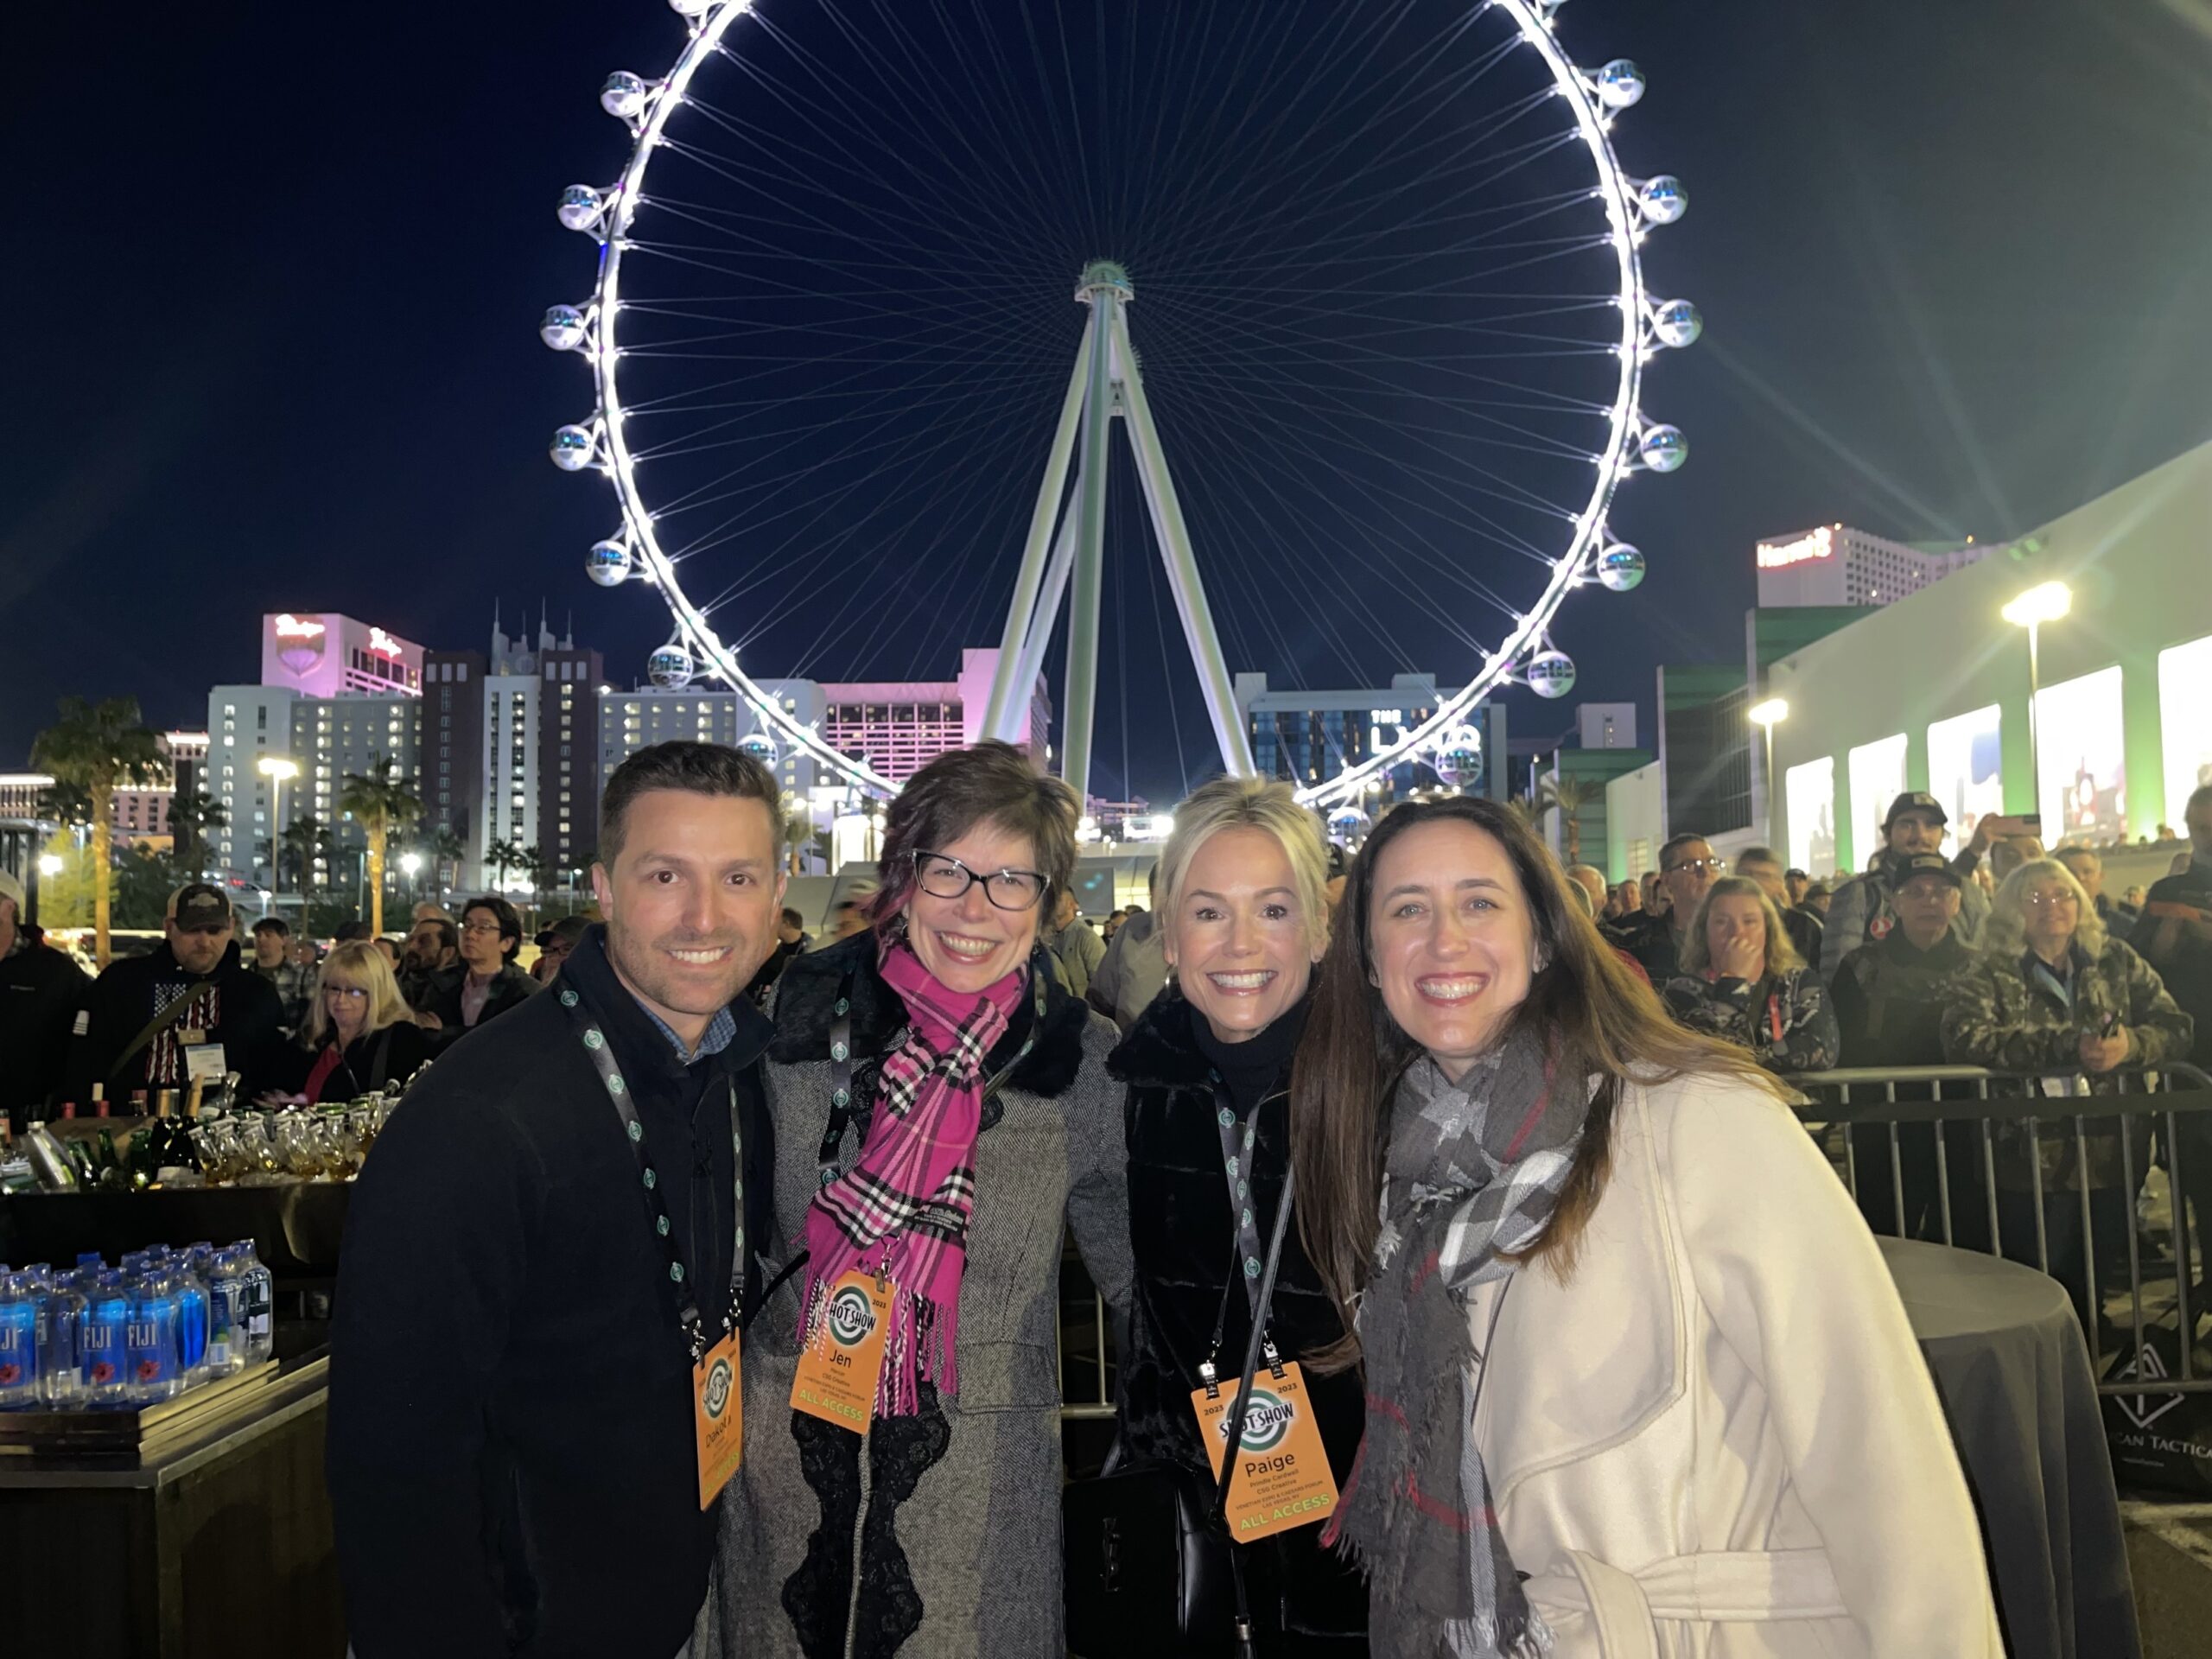 Four people standing in front of a Ferris wheel at night